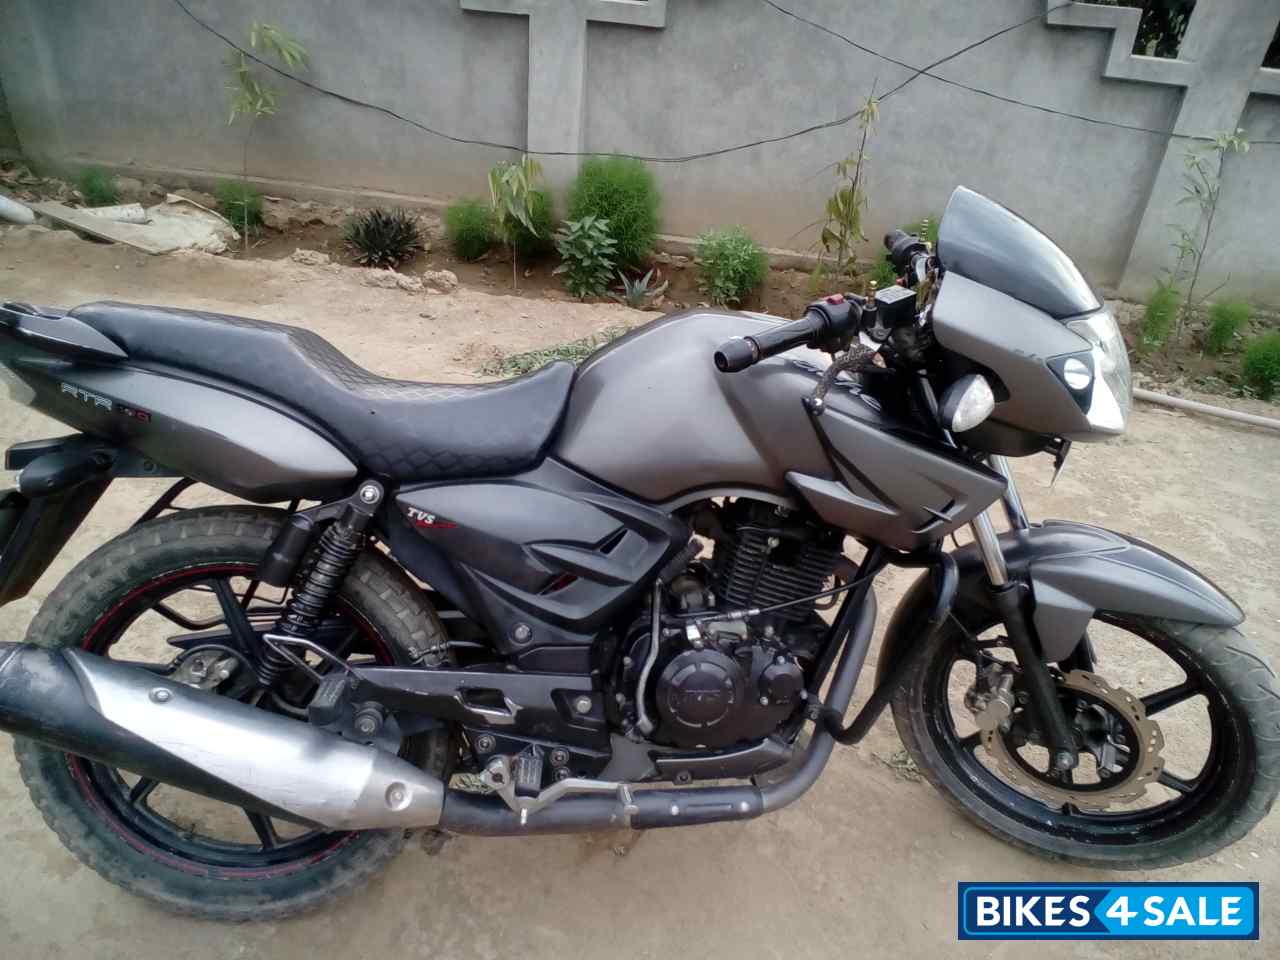 Used 10 Model Tvs Apache Rtr 160 For Sale In Moradabad Id Tit Gray Colour Bikes4sale